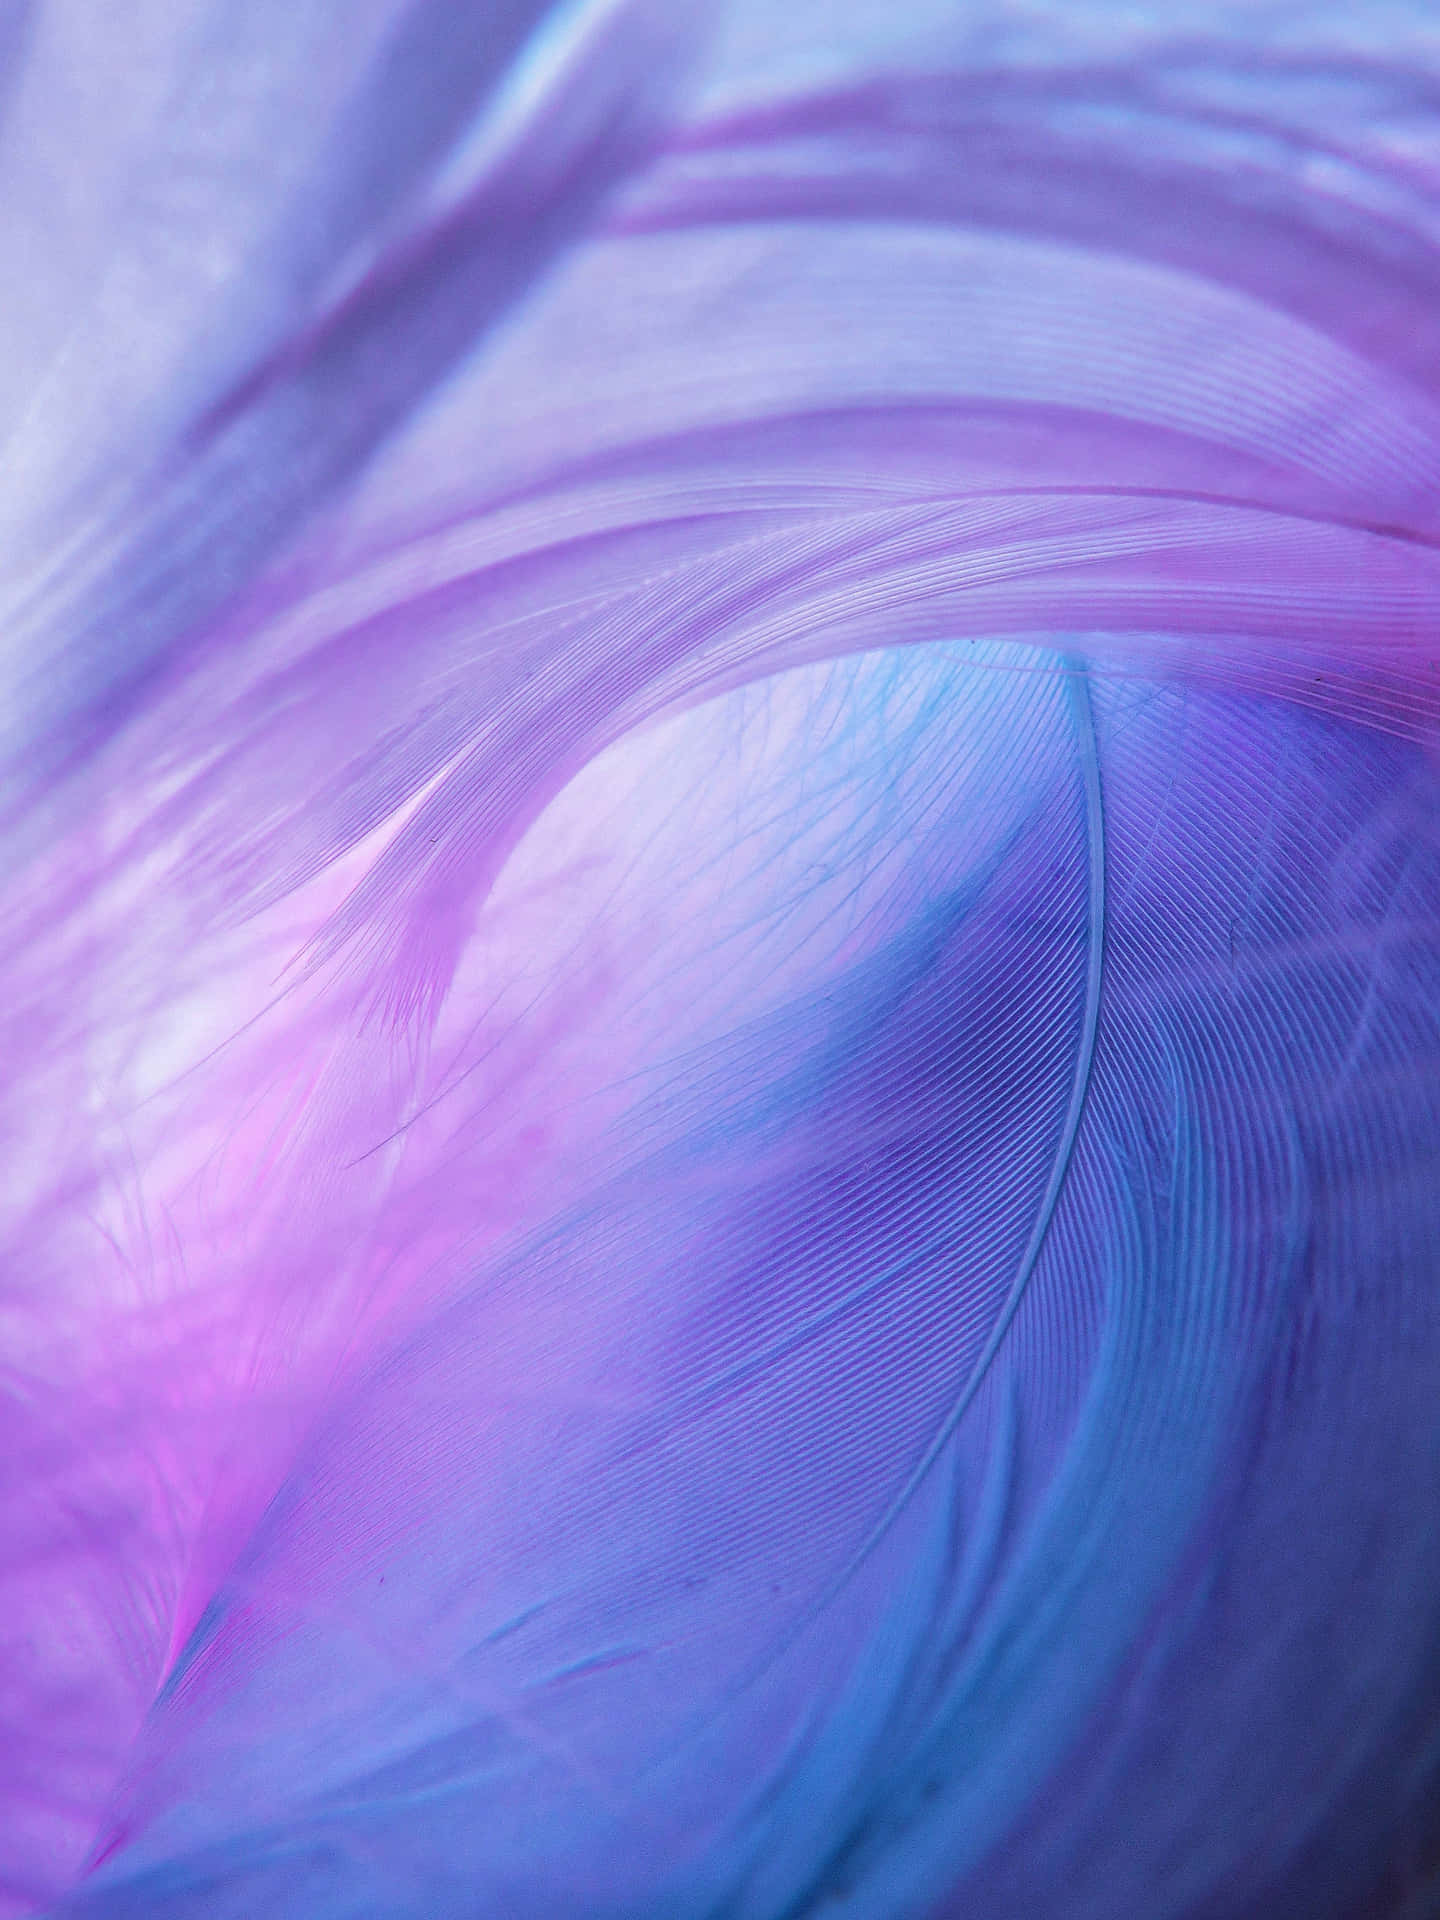 A unique color combination of purple and blue come together to create a mesmerizing aesthetic Wallpaper